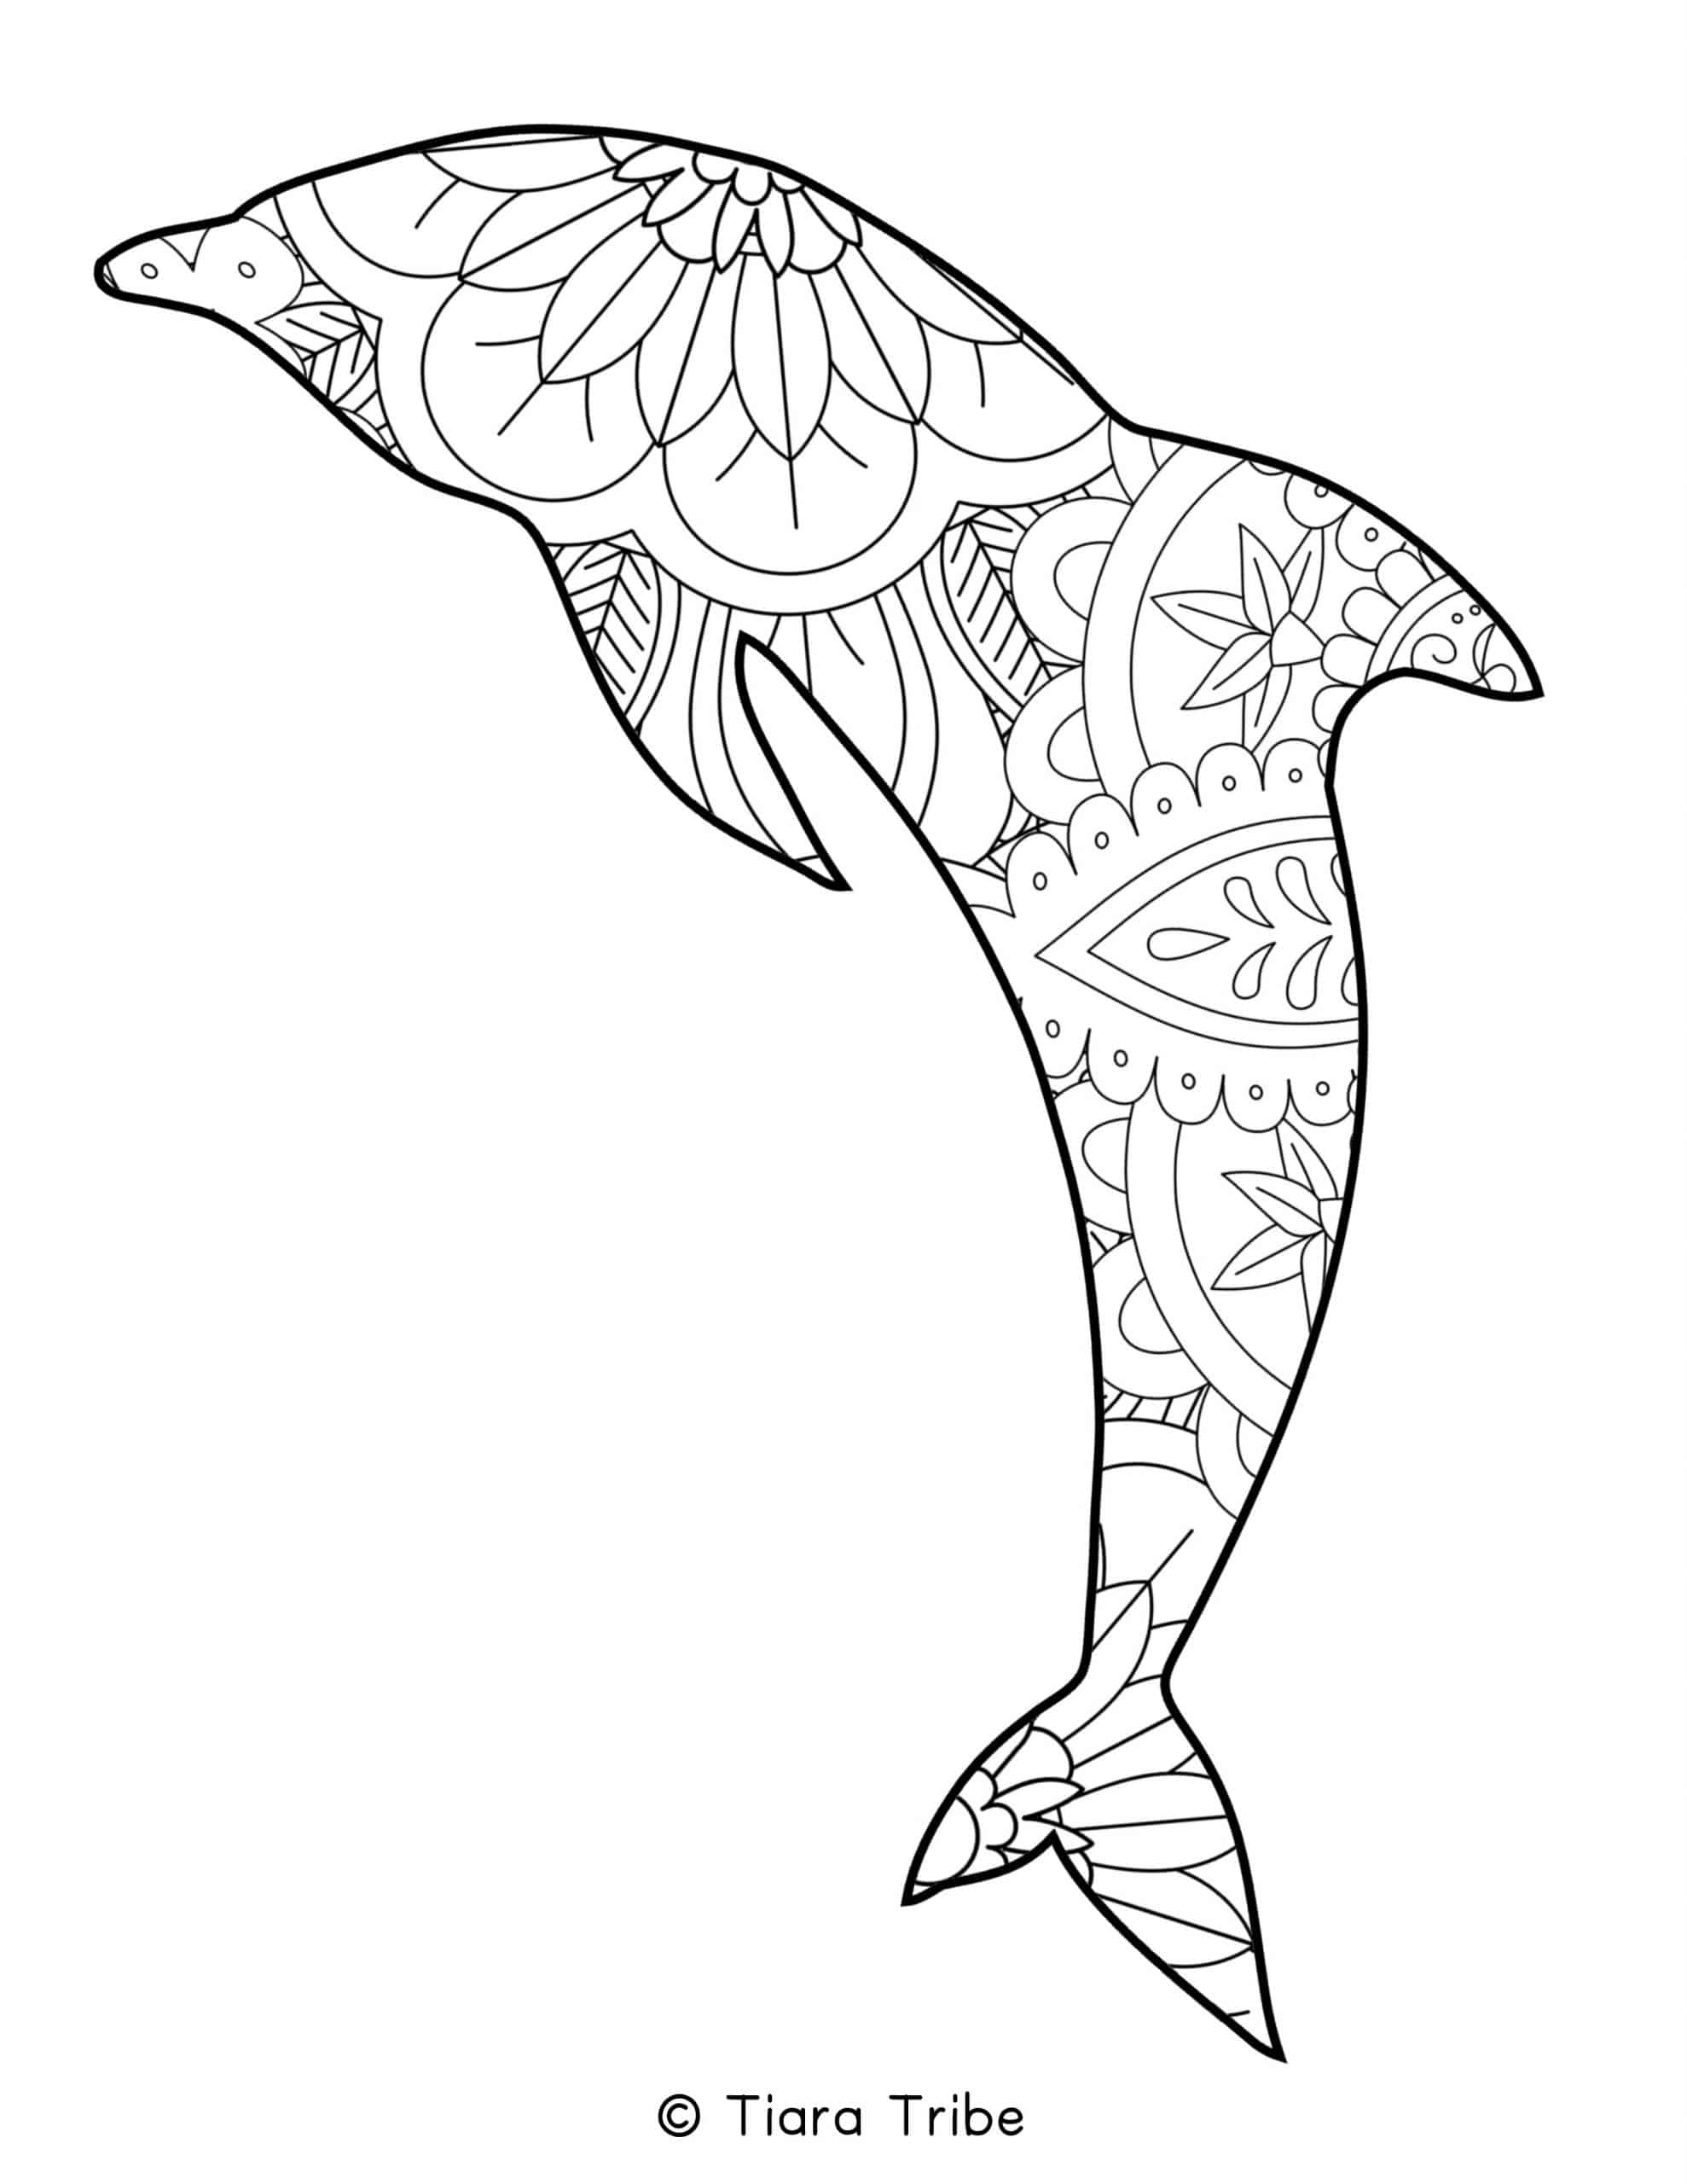 Best free animal mandala coloring pages pdfs to download